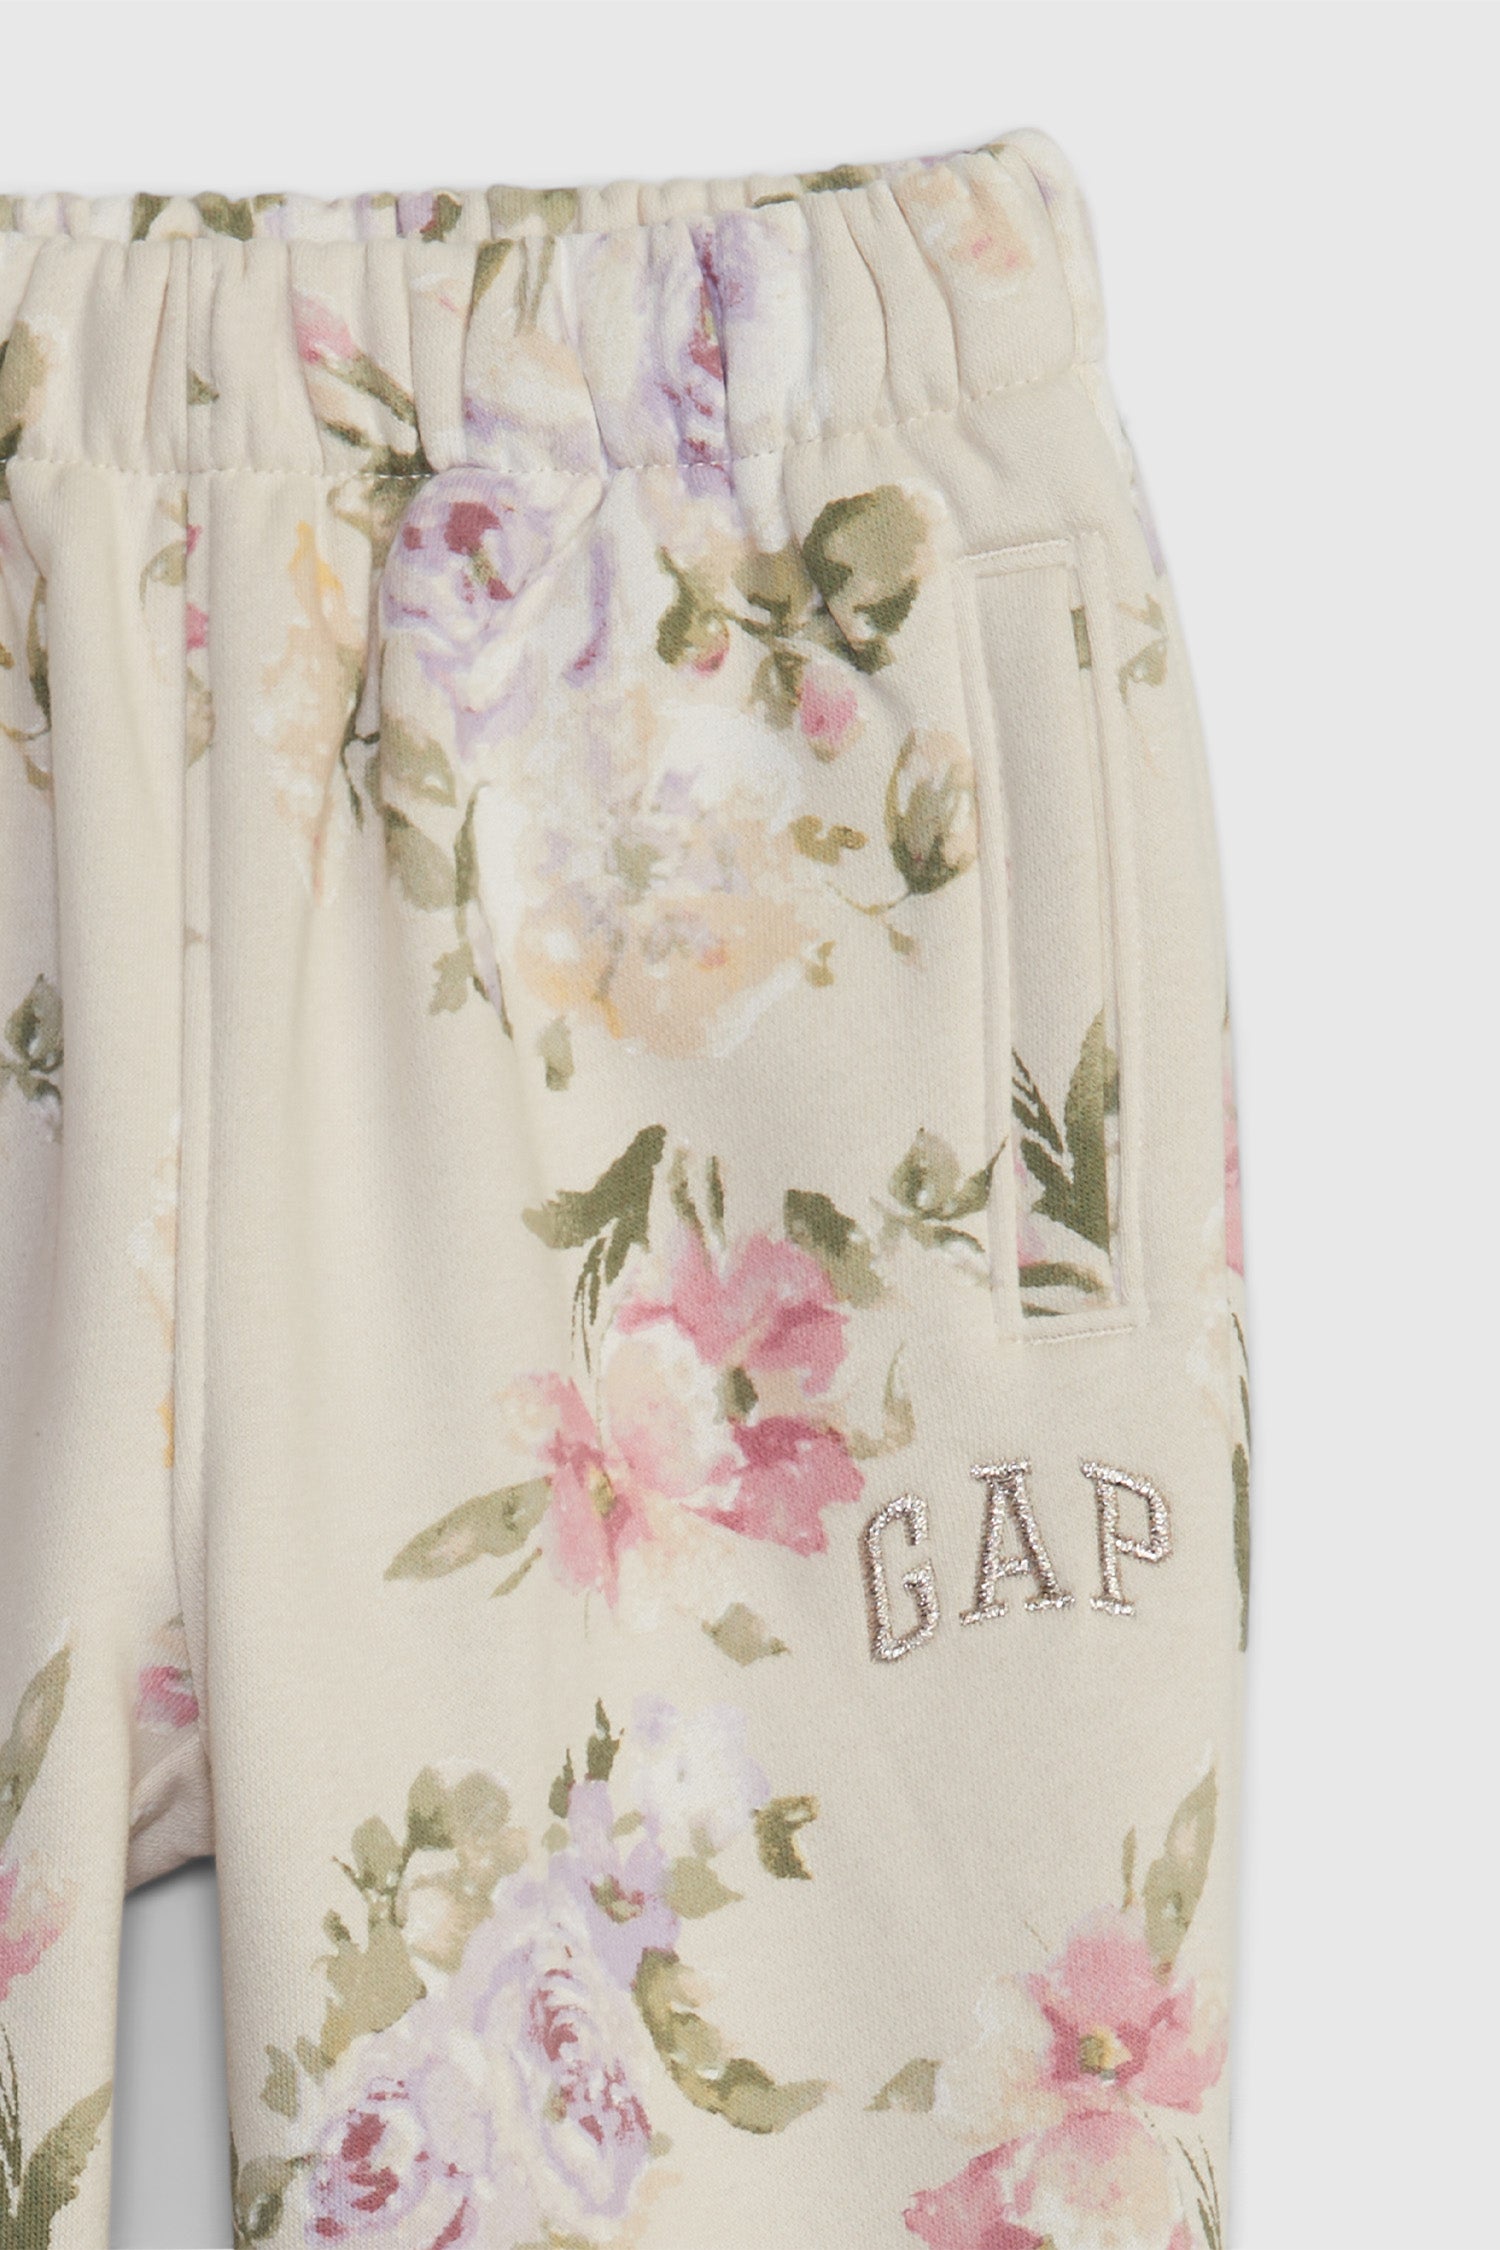 Close up image detailing GAP logo and pink, purple, yellow, and green floral print on girl's toddler cream joggers